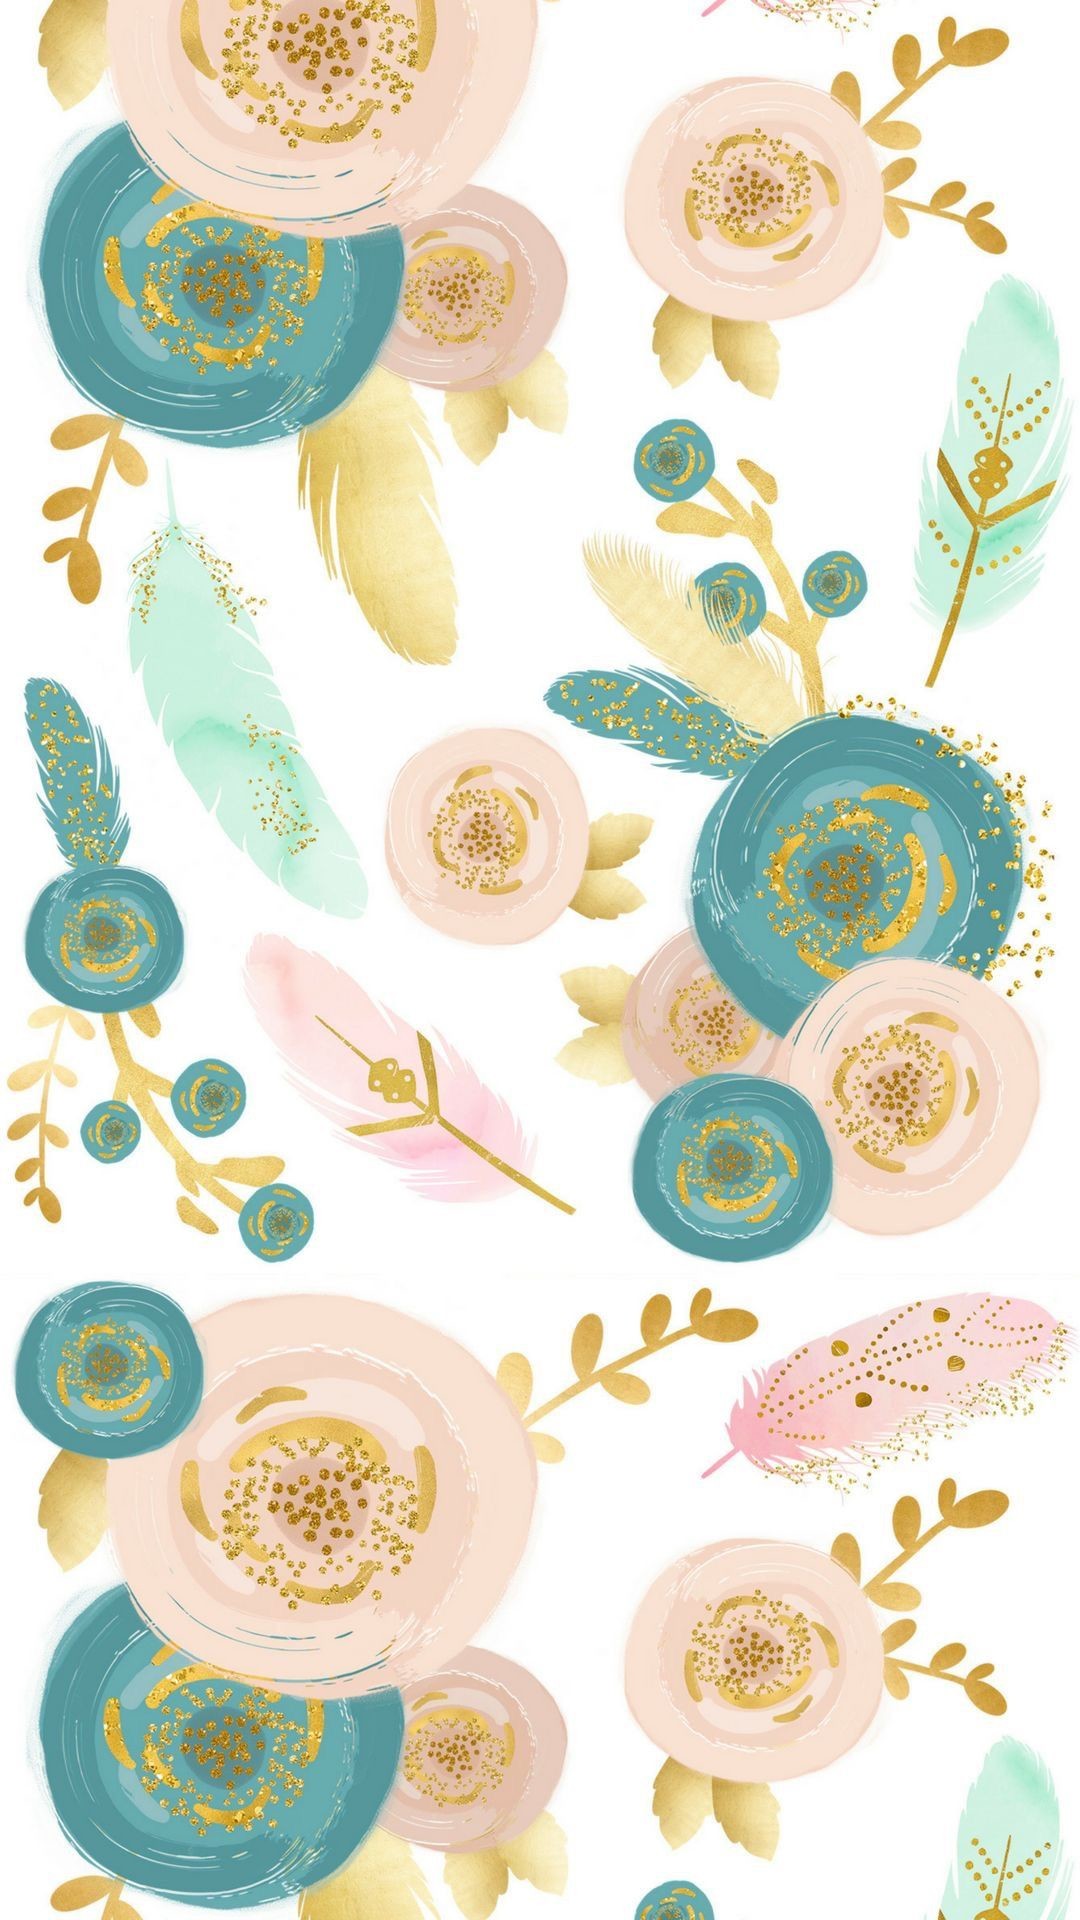 1080x1920 Floral print with gold accents. Wallpaper Backgrounds, Phone Wallpaper Boho,  Boho Backgrounds,